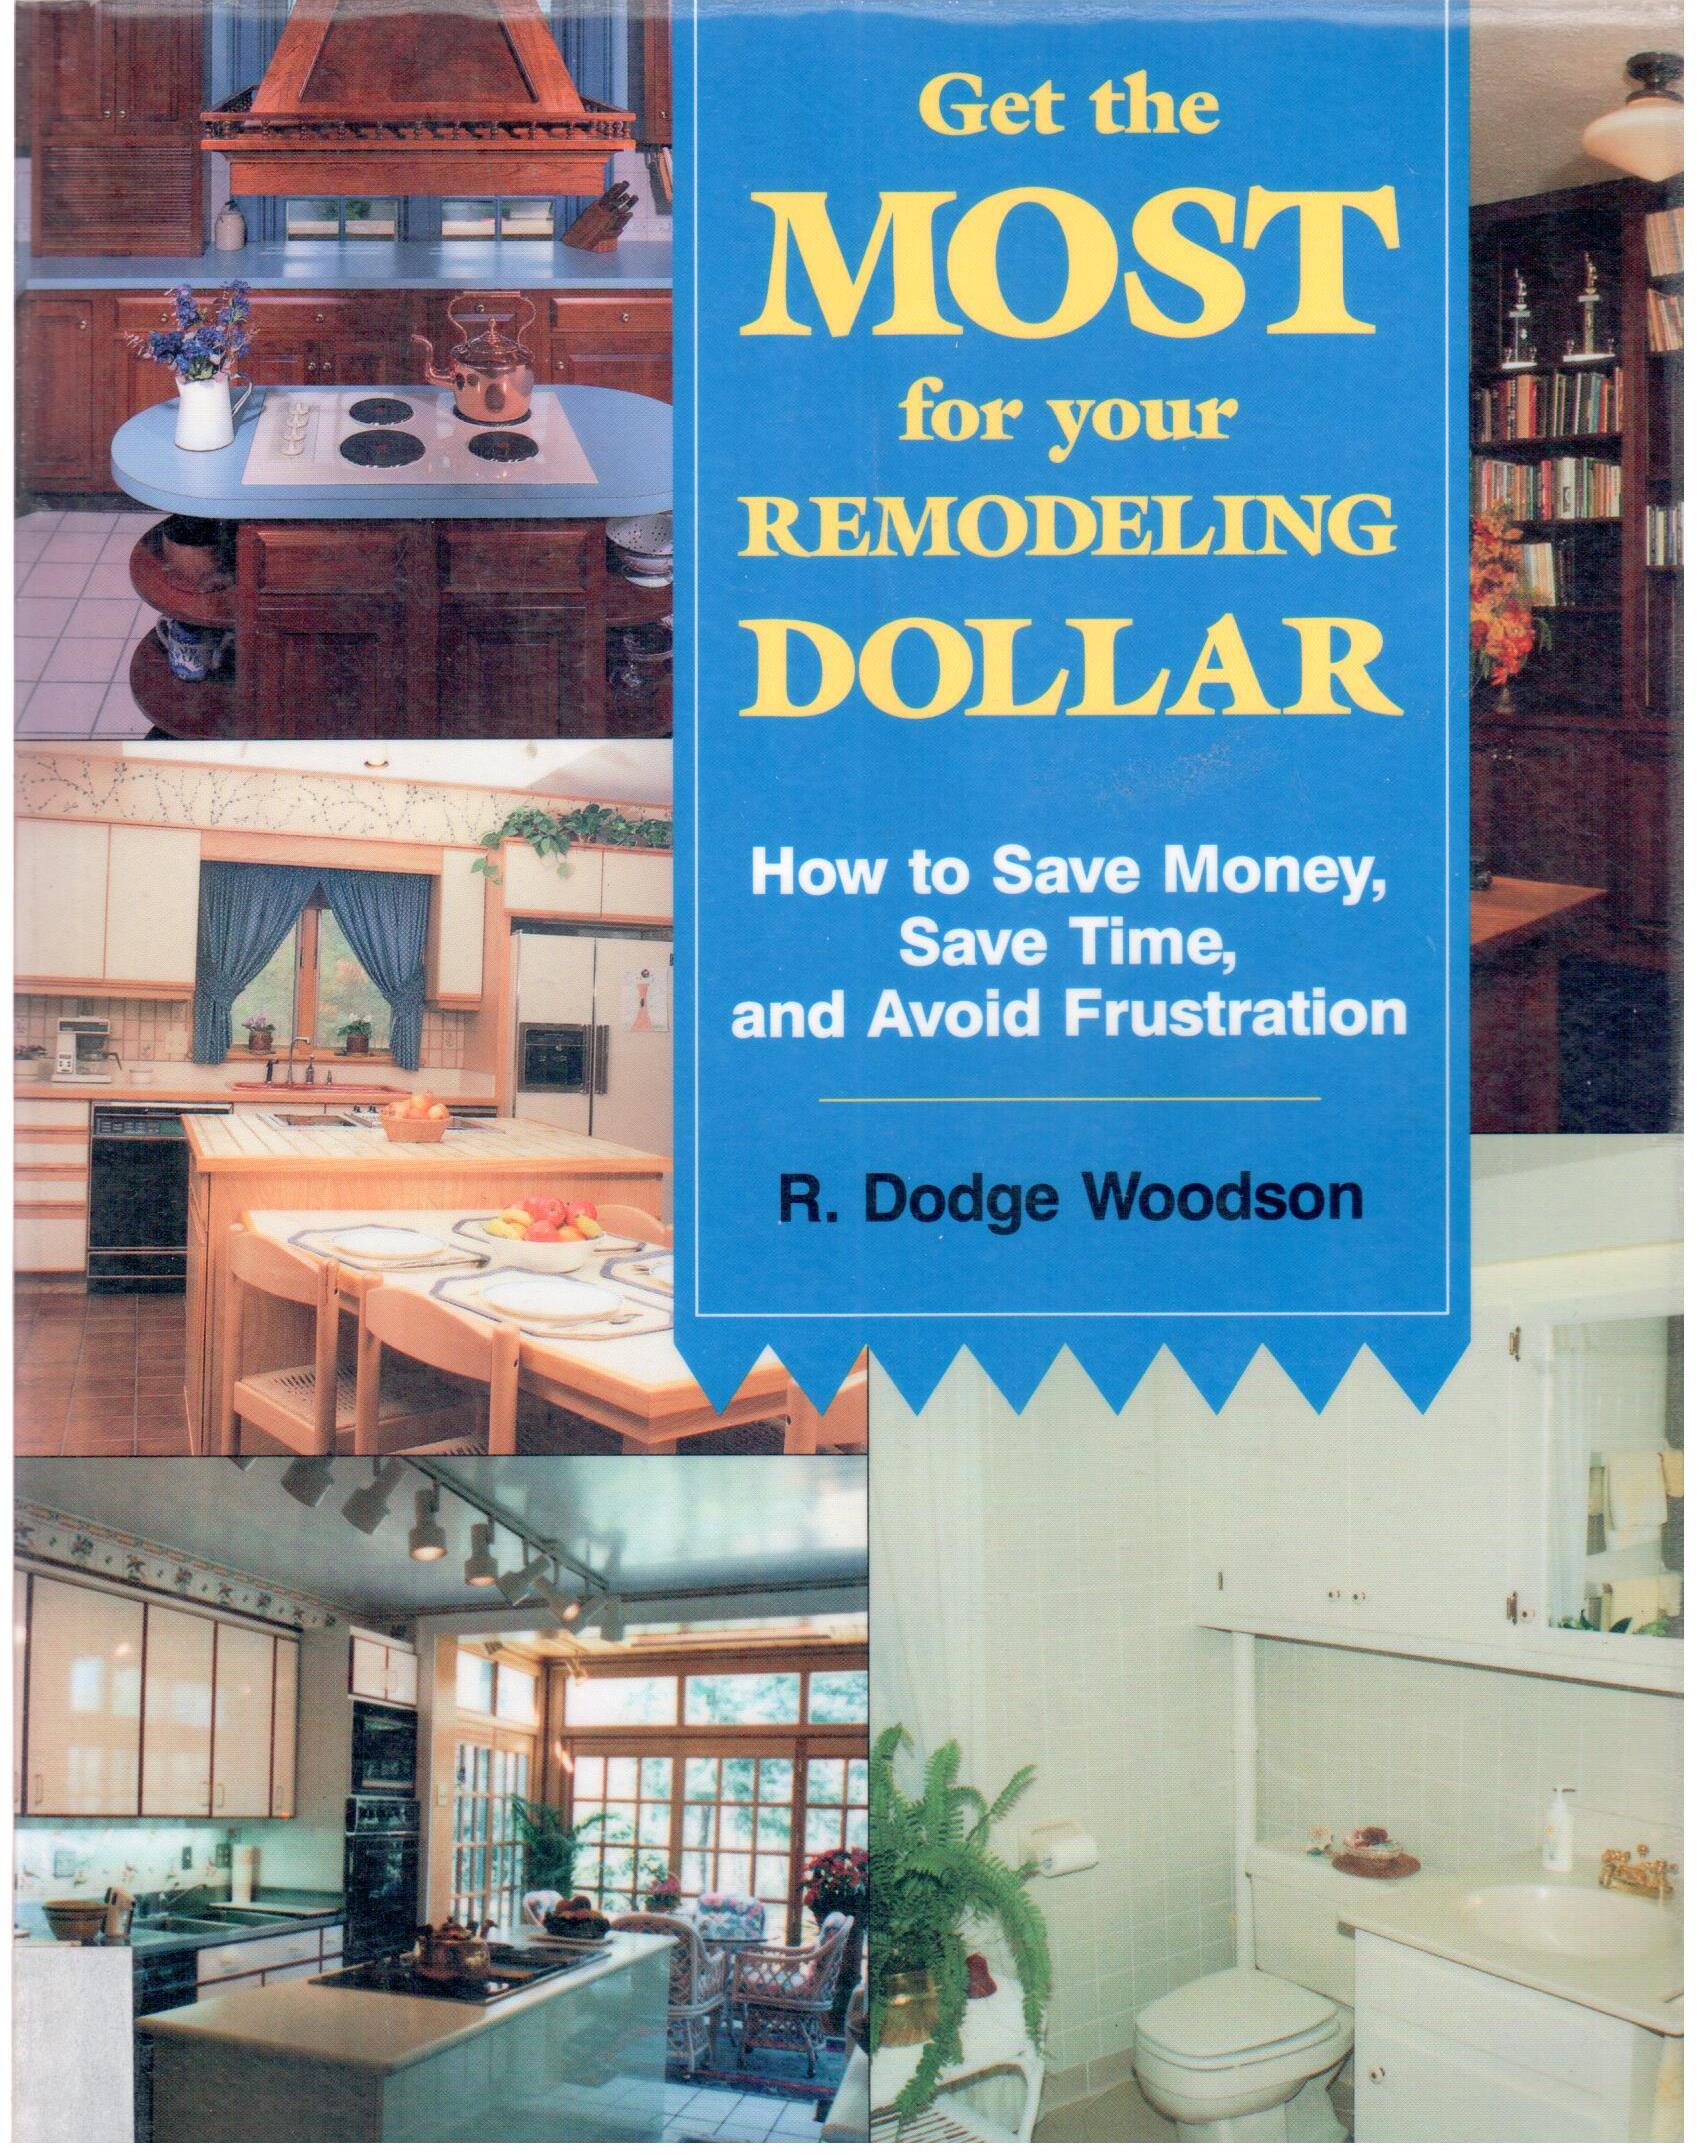 Get the most for your remodelling dollar : how to save money, save time, and avoid frustration